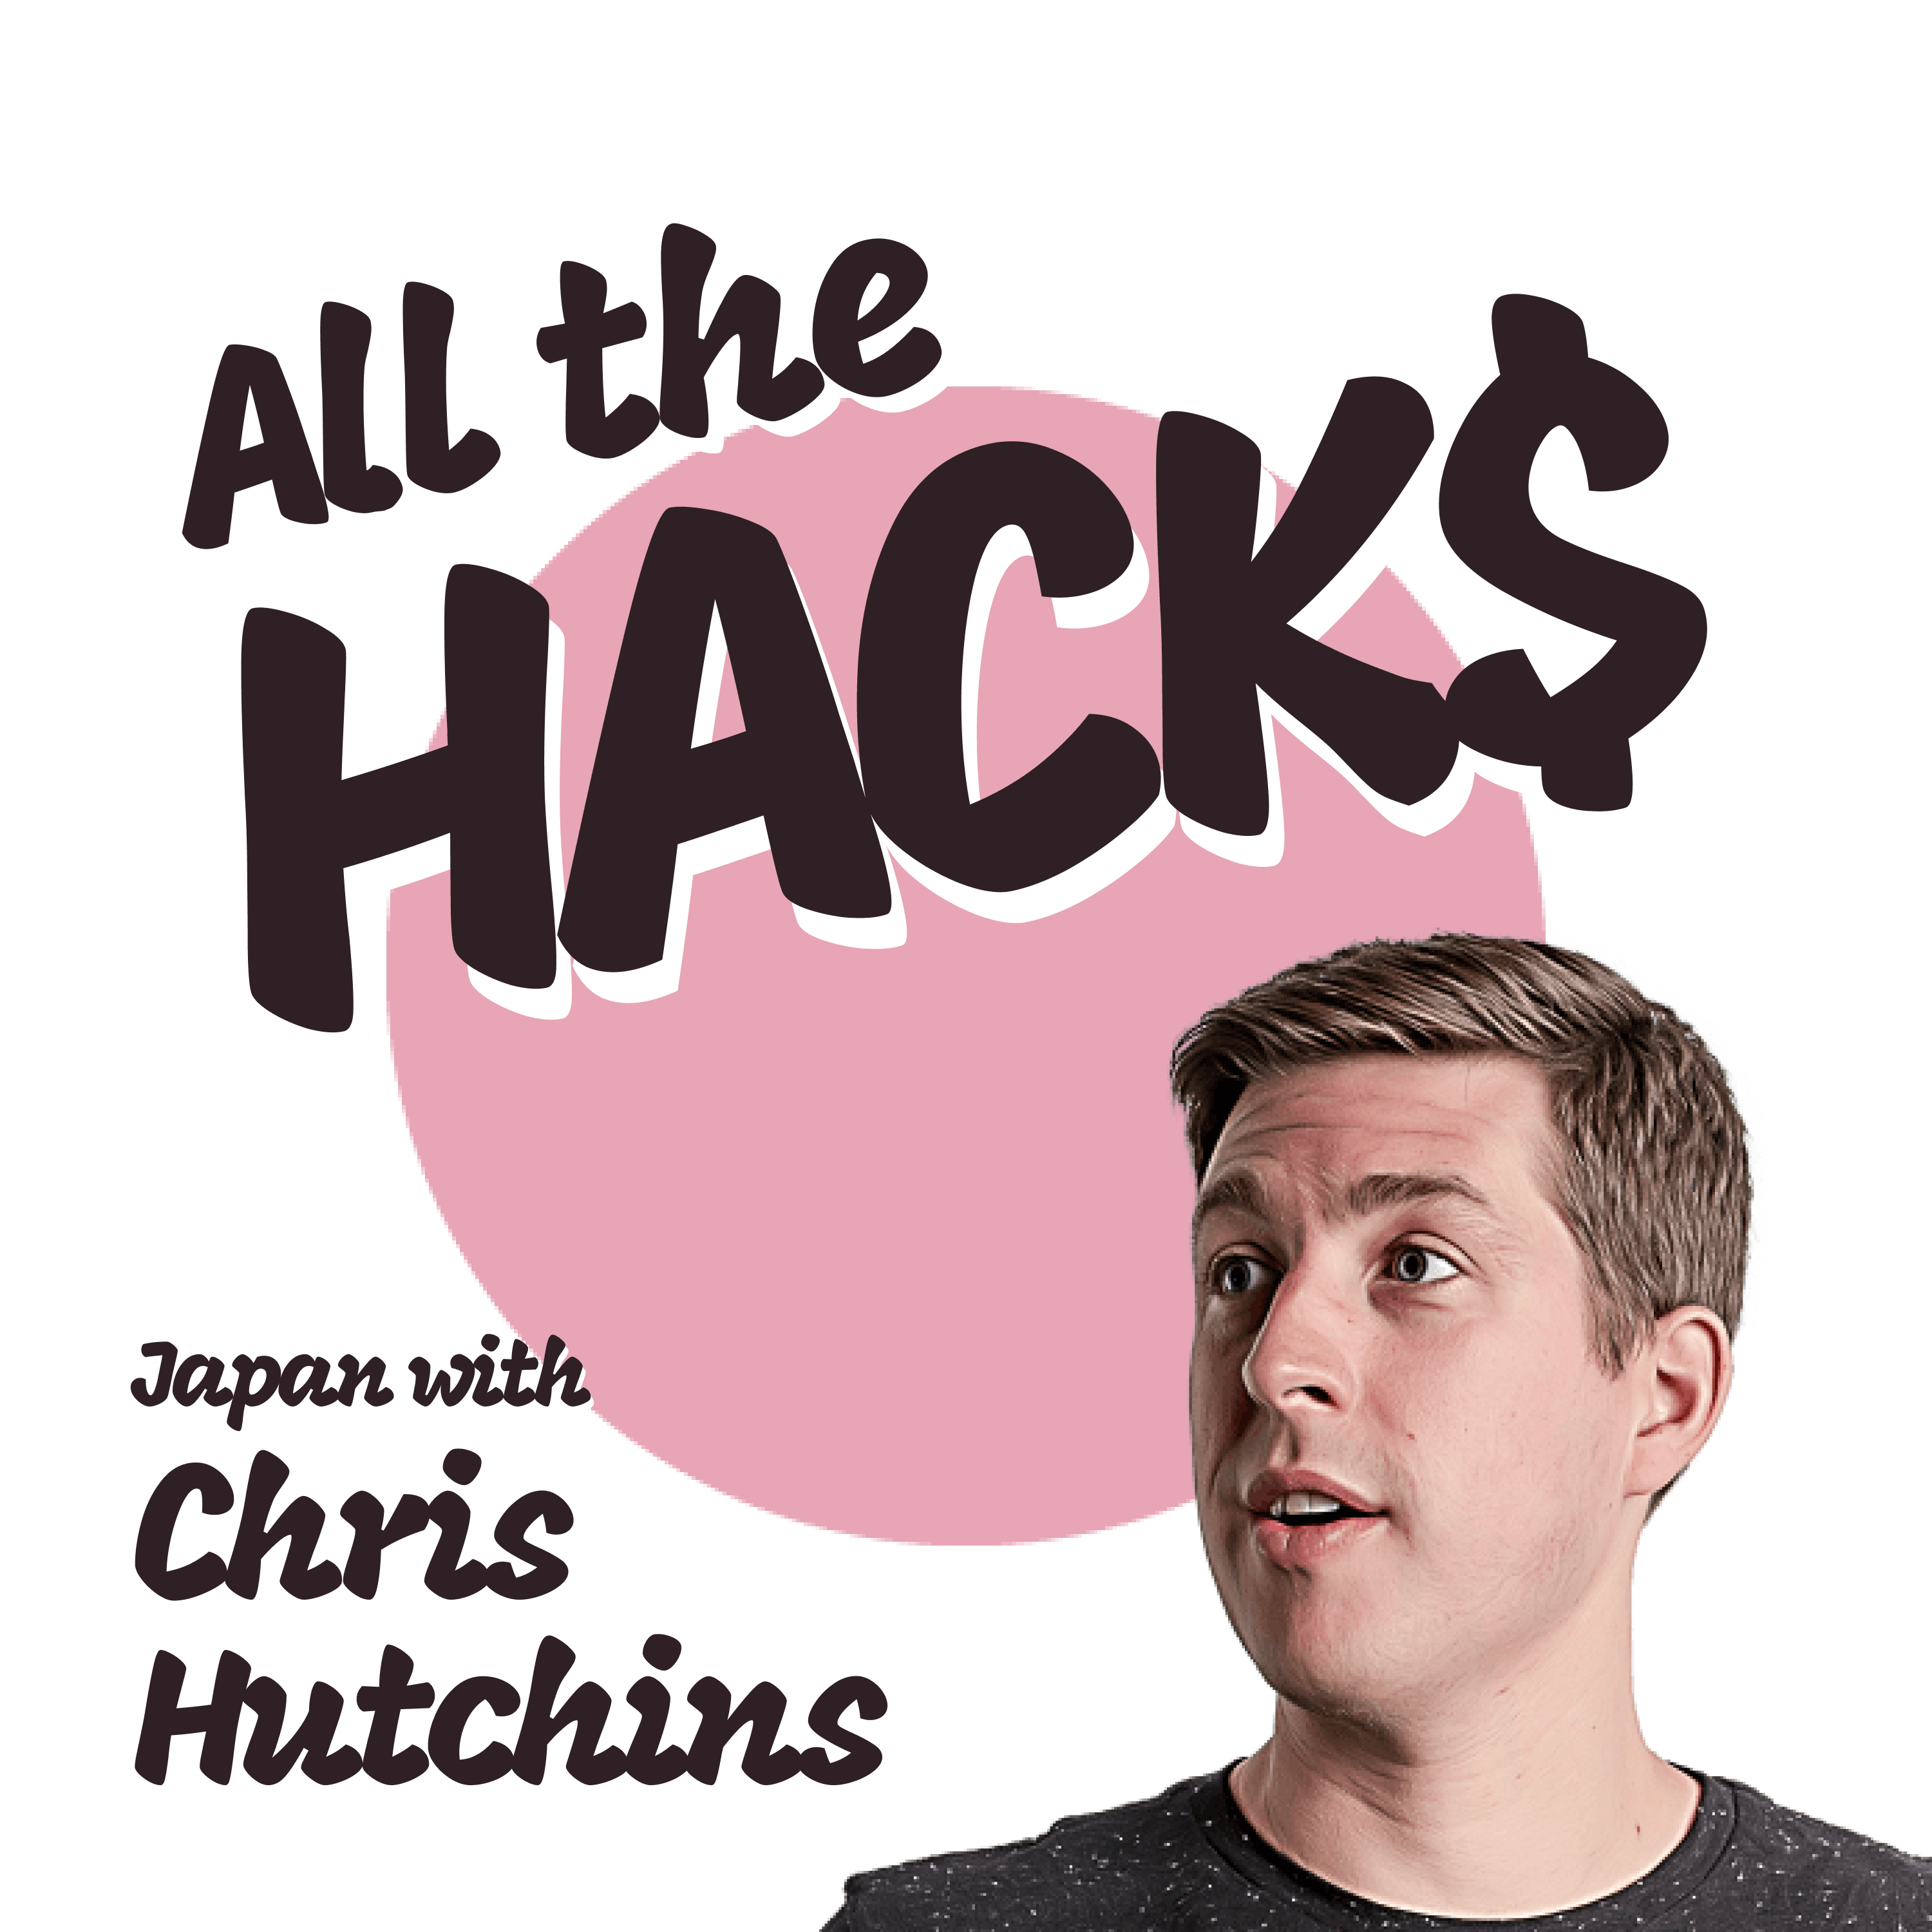 Travel Hacking Japan with Points & Miles with Chris Hutchins